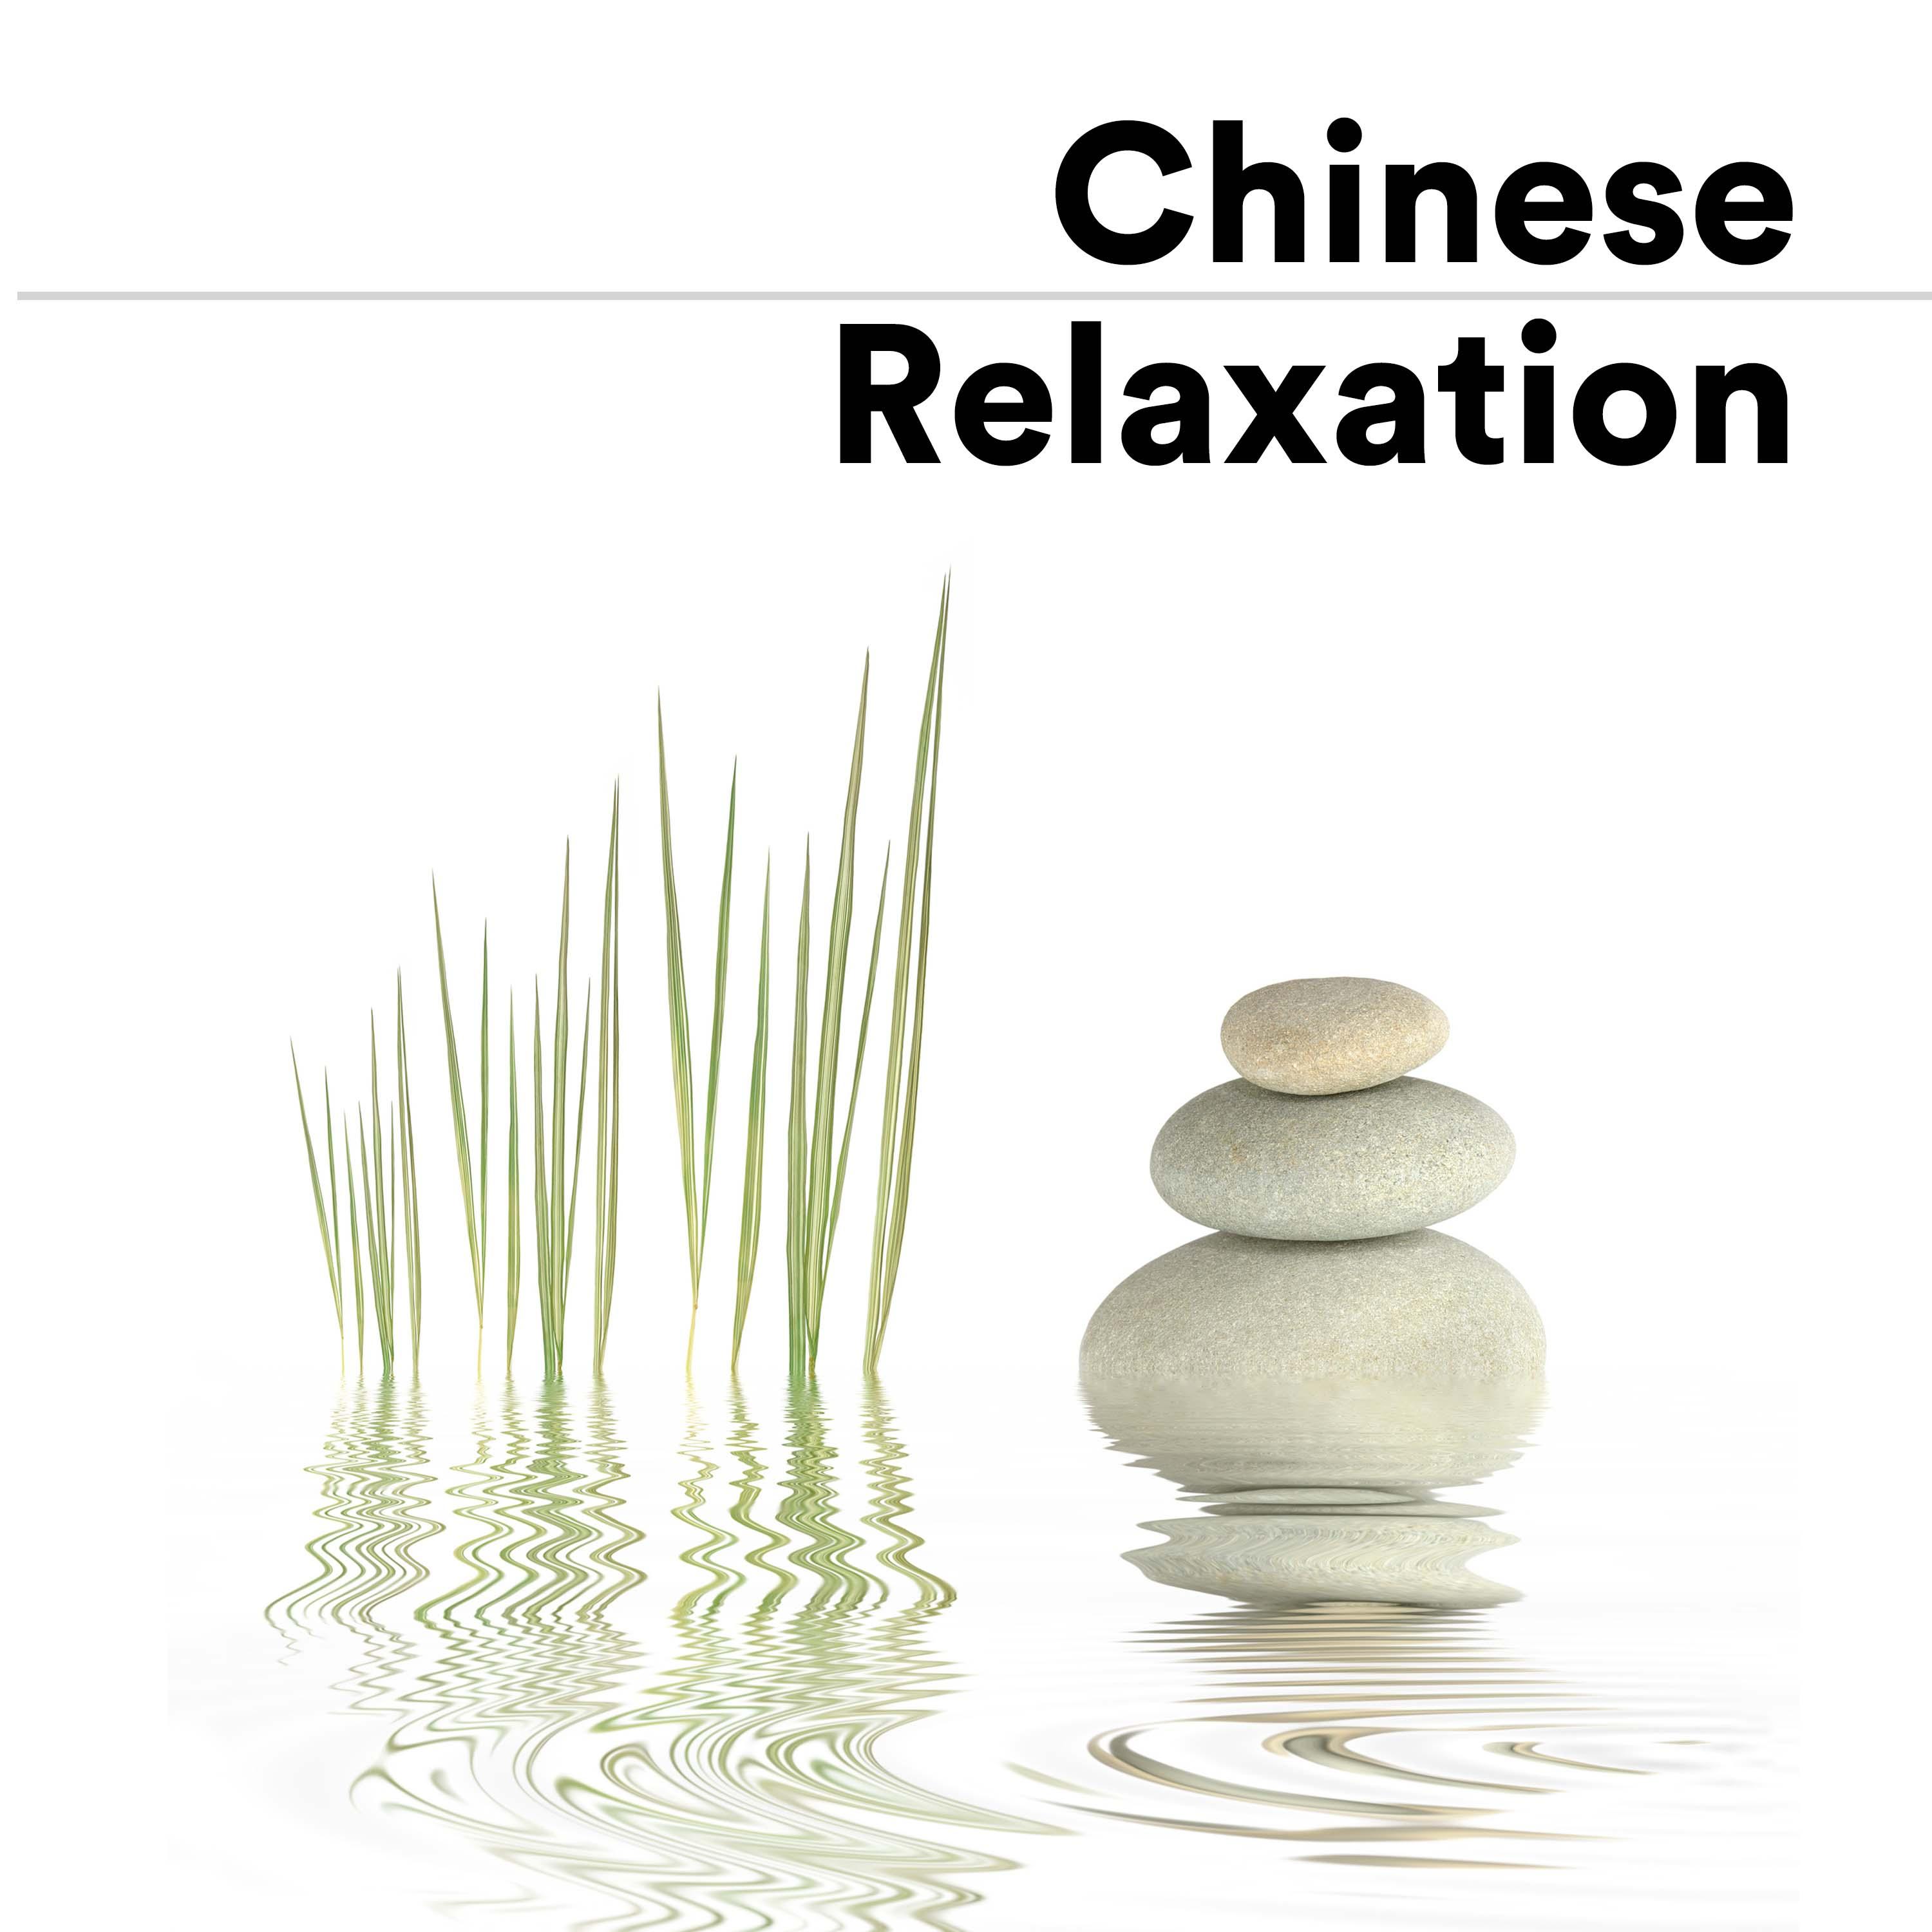 Chinese Relaxation - Sounds of Relaxation with the World's Best New Age Relaxing Music